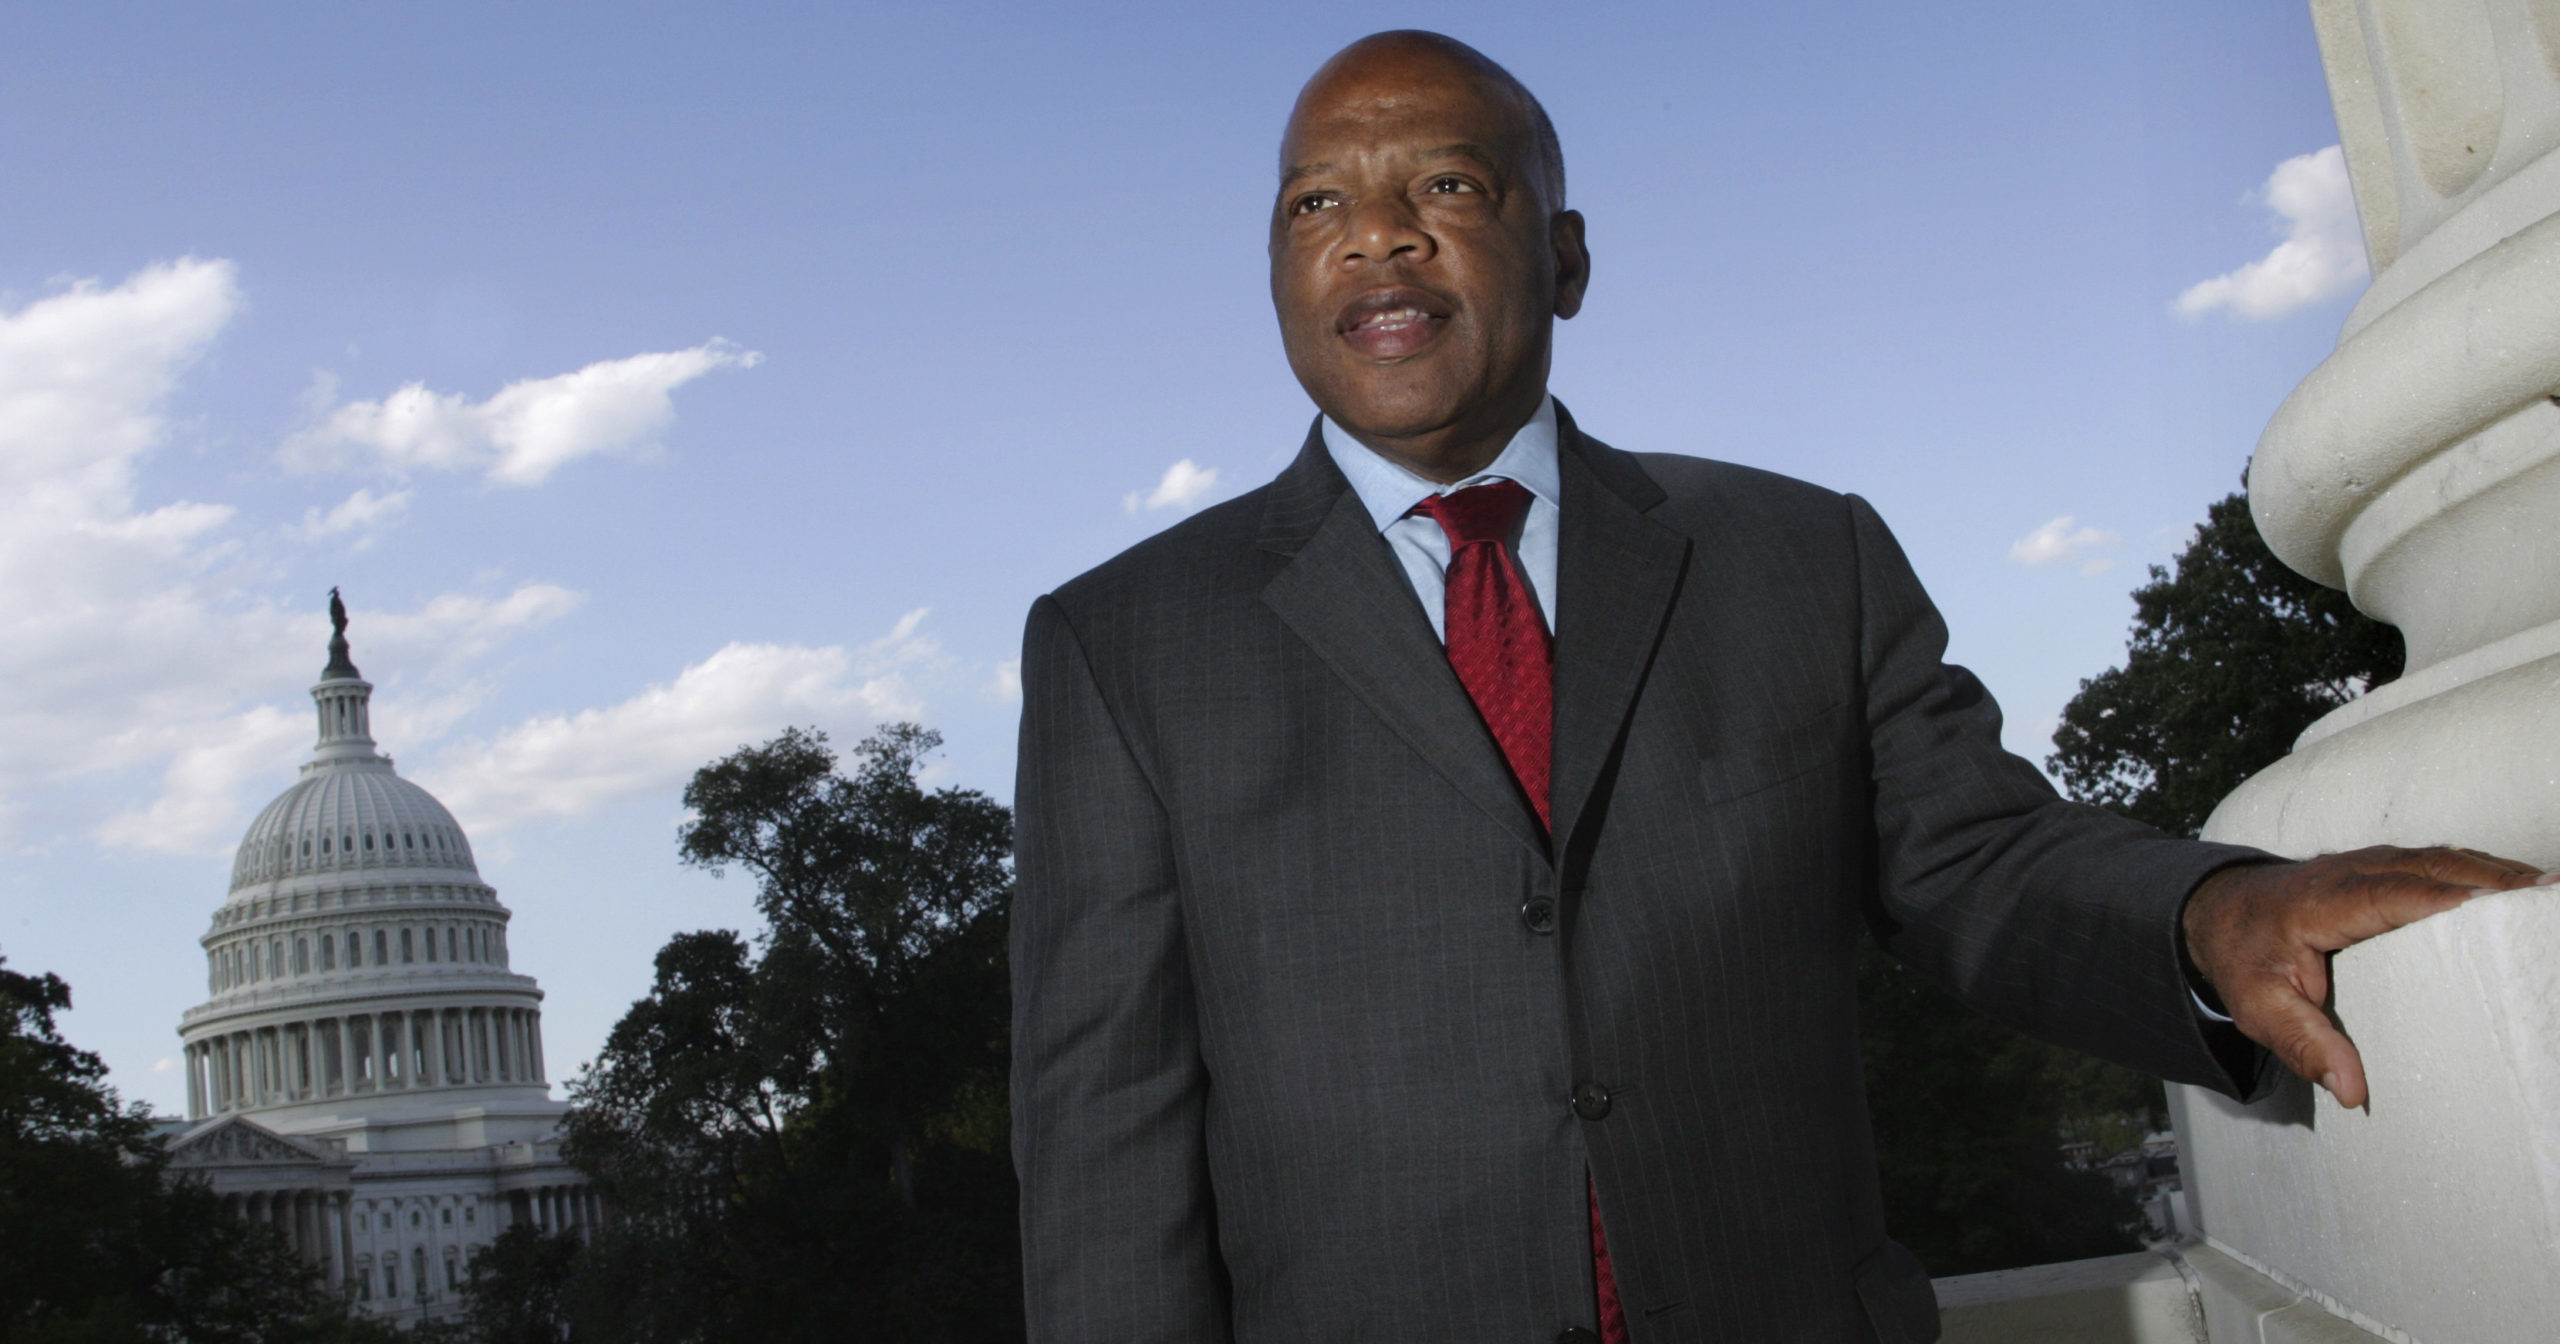 In this Oct. 10, 2007, file photo, with the Capitol Dome in the background, Georgia Democratic Rep. John Lewis is seen on Capitol Hill in Washington.